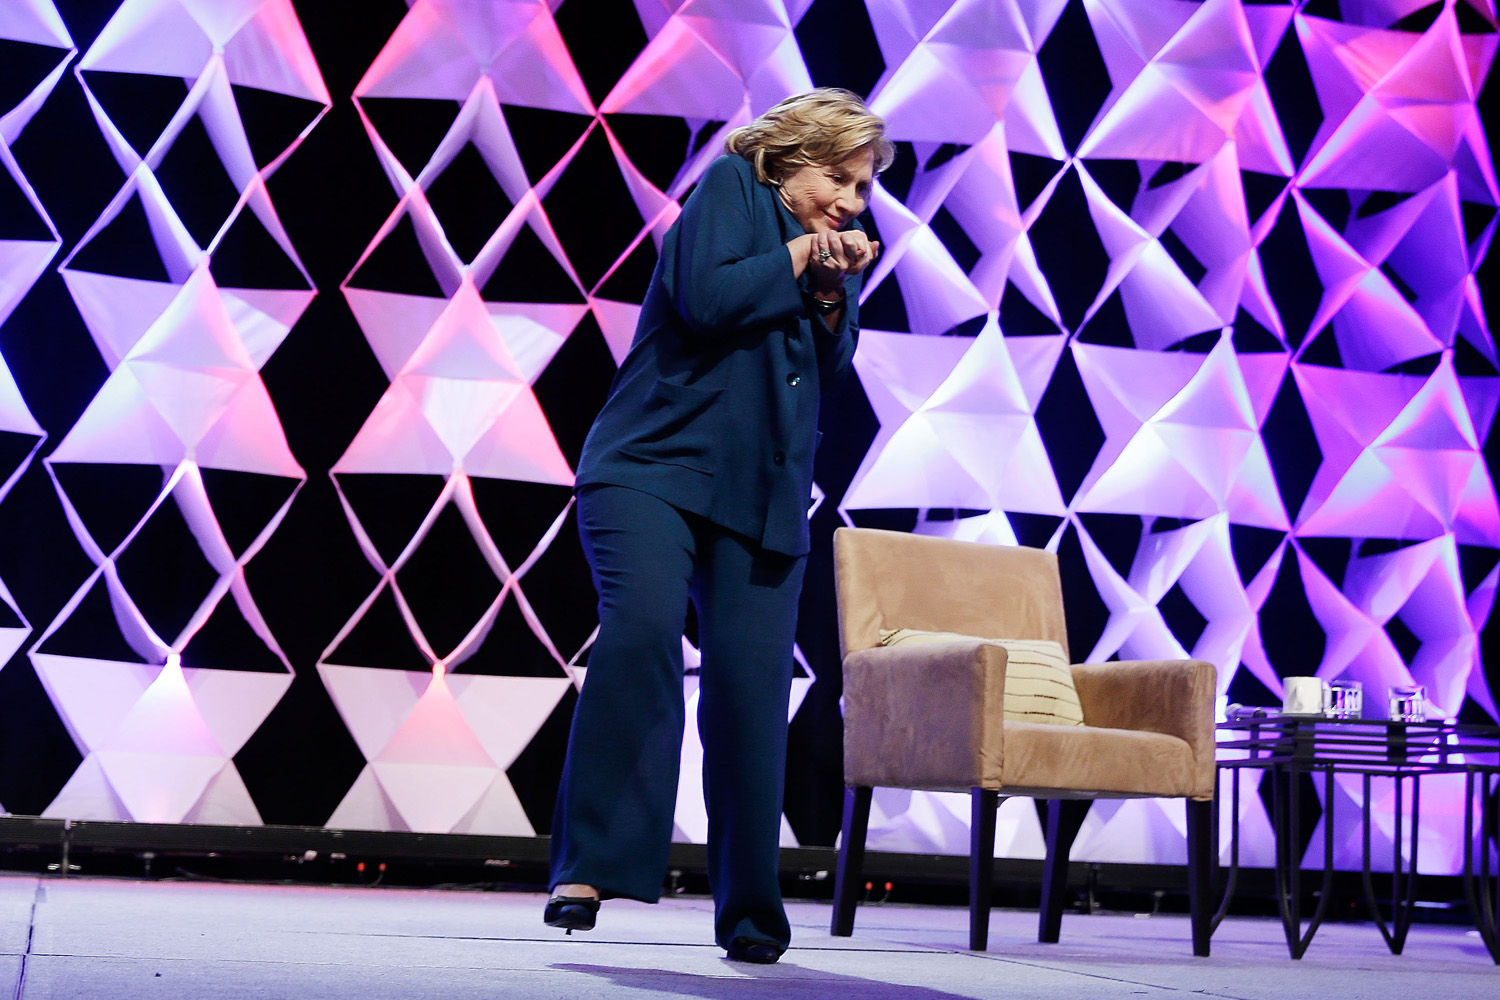 Former Secretary of State Hillary Clinton ducks after a woman threw an object toward her while she was delivering remarks at the Institute of Scrap Recycling Industries conference on April 10, 2014 in Las Vegas, Nevada.